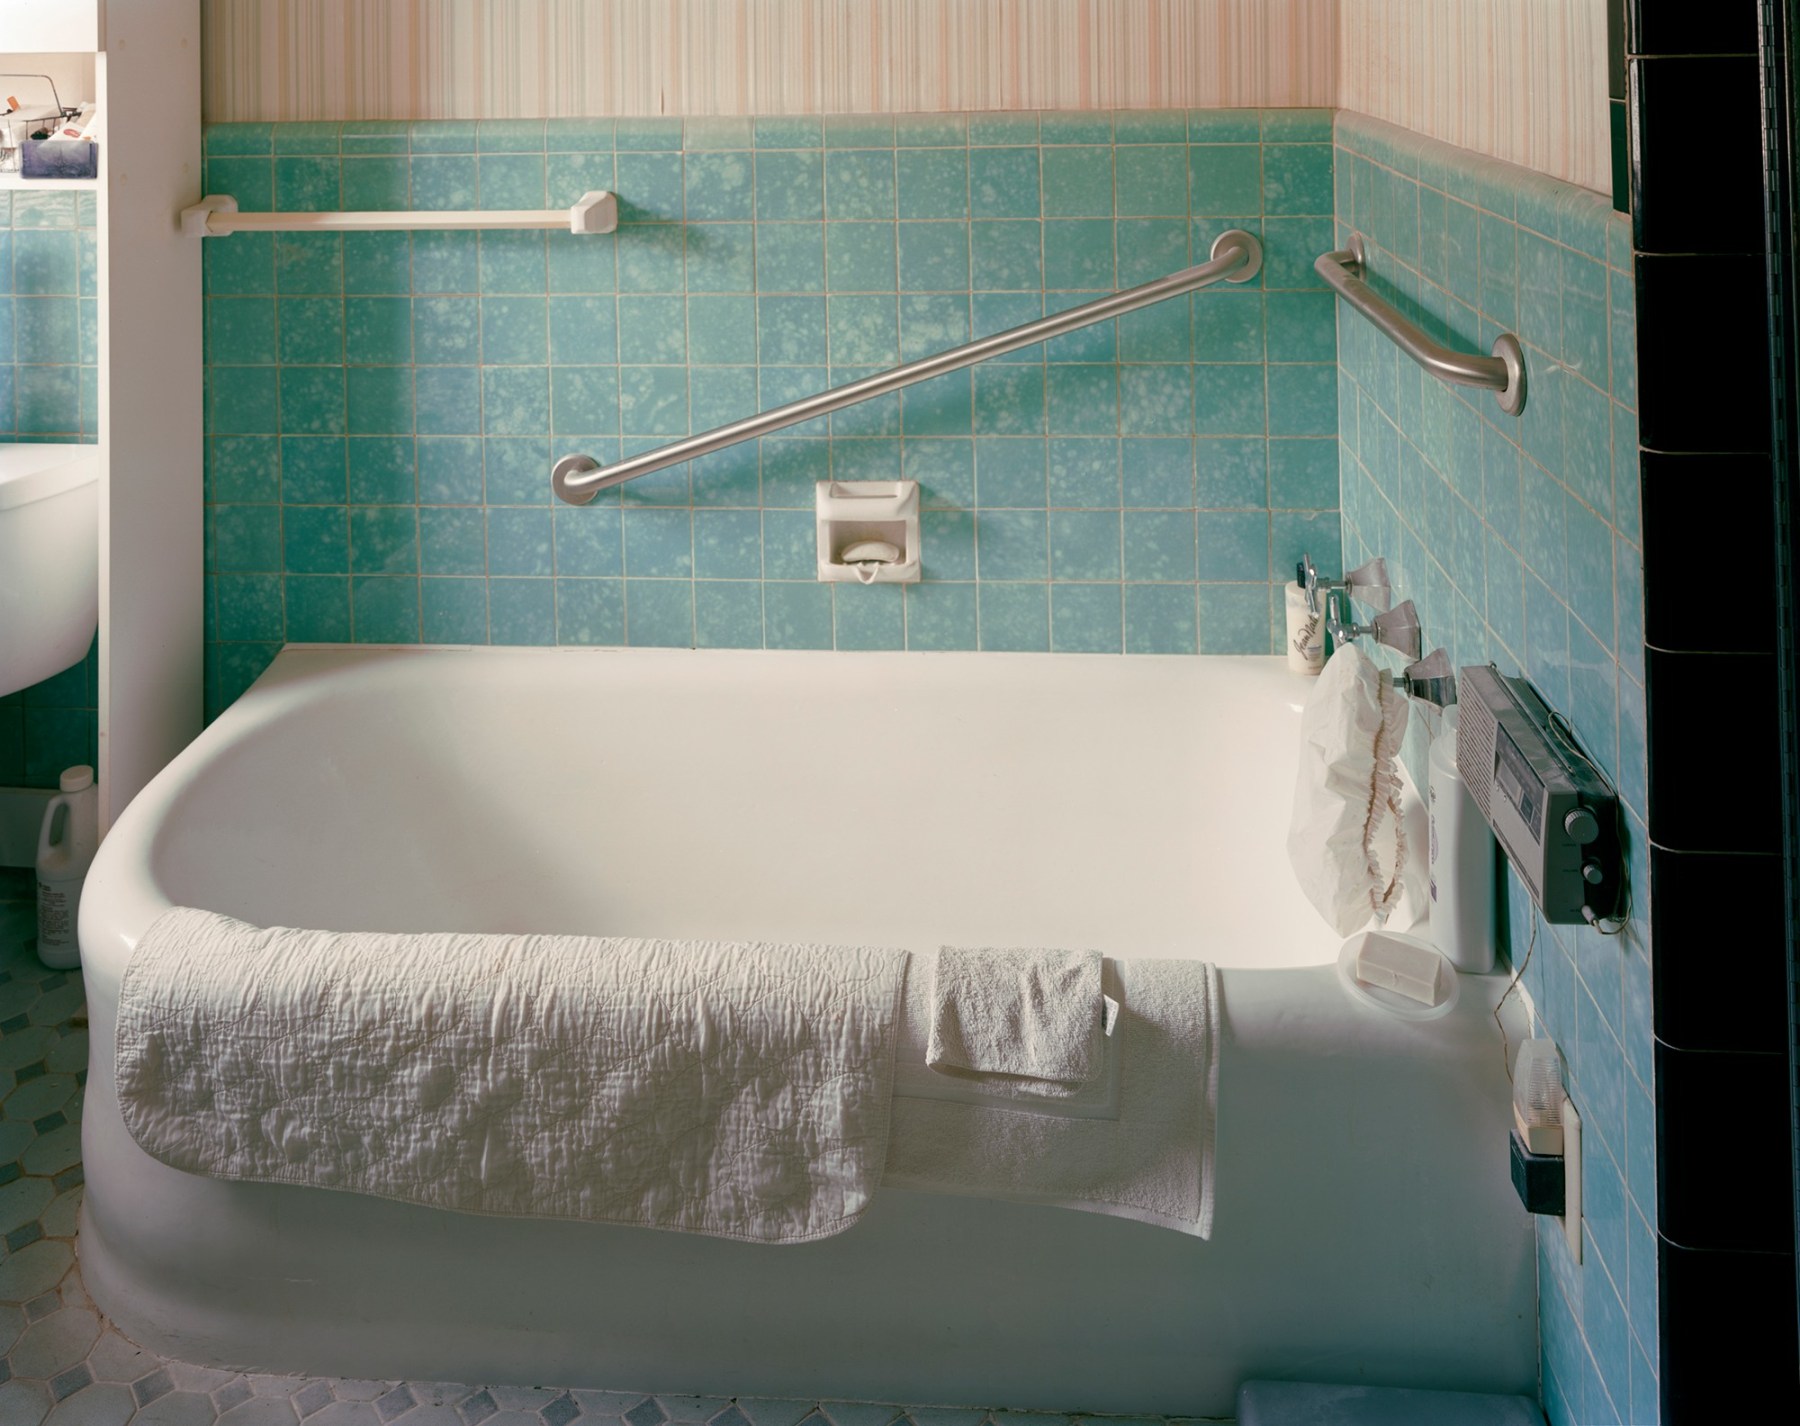 Photograph of bathtub in tiled bathroom, by Jade Doskow, by Jade Doskow